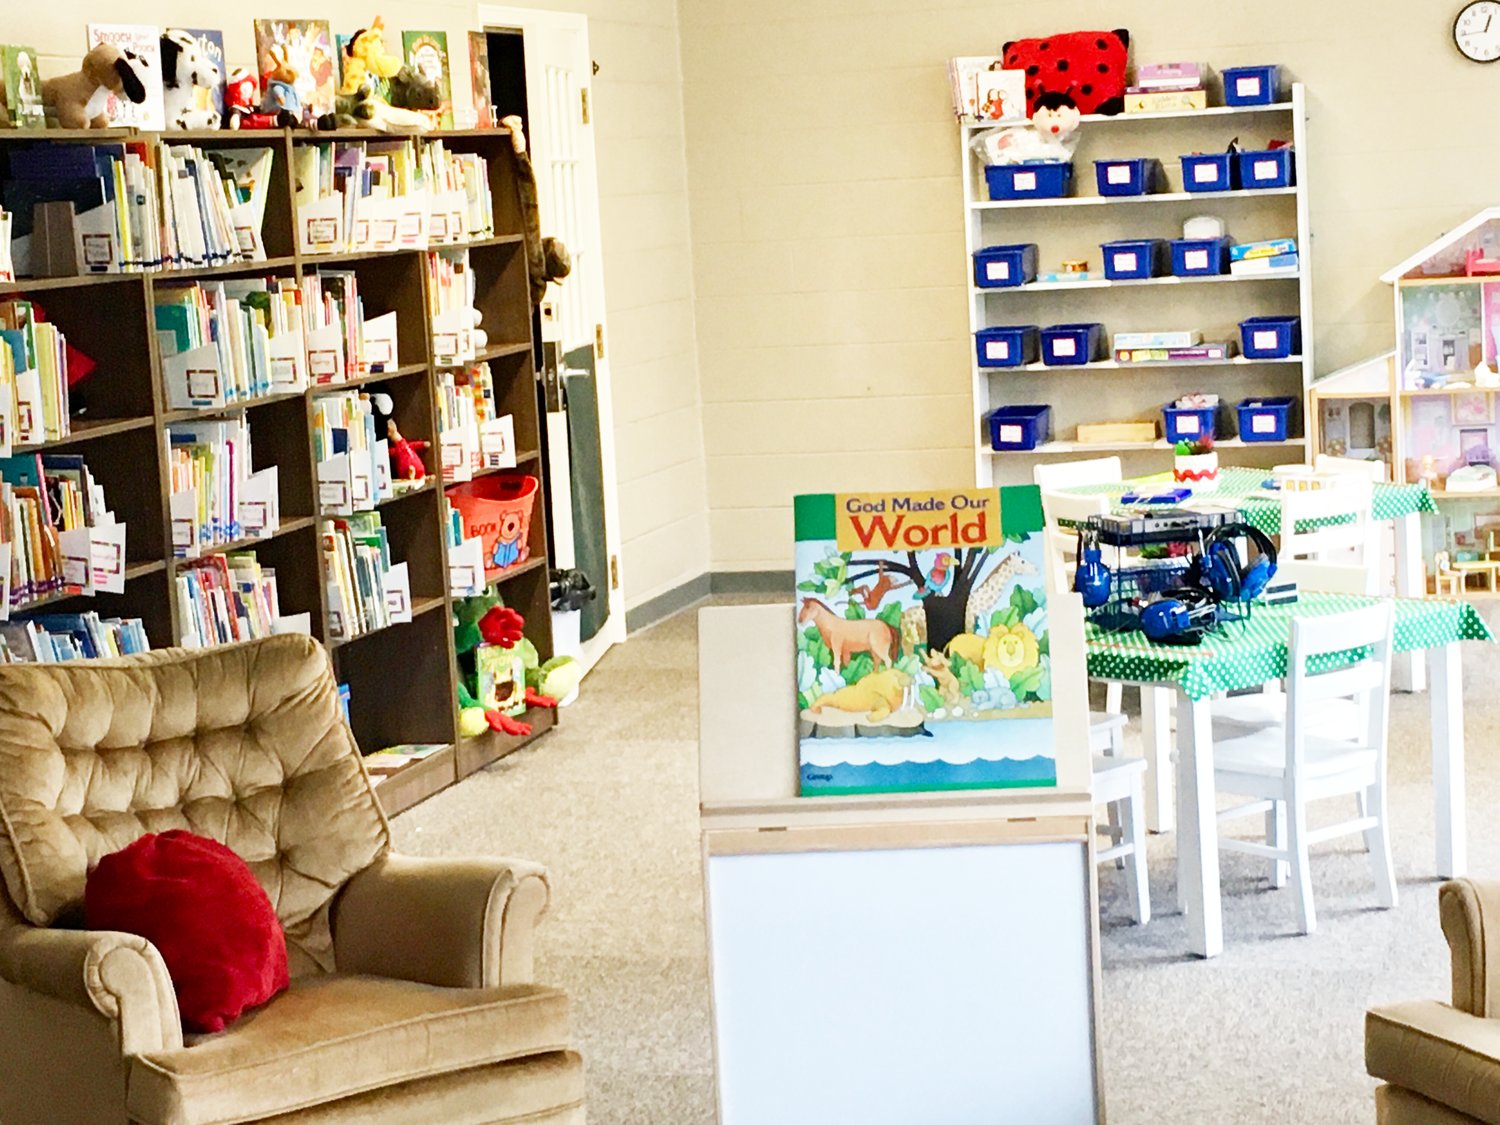 The library at Rainbows and Rhymes Preschool and Child Care was expanded as part of renovations to prepare the facility for all-day programming. Sessions began this week.